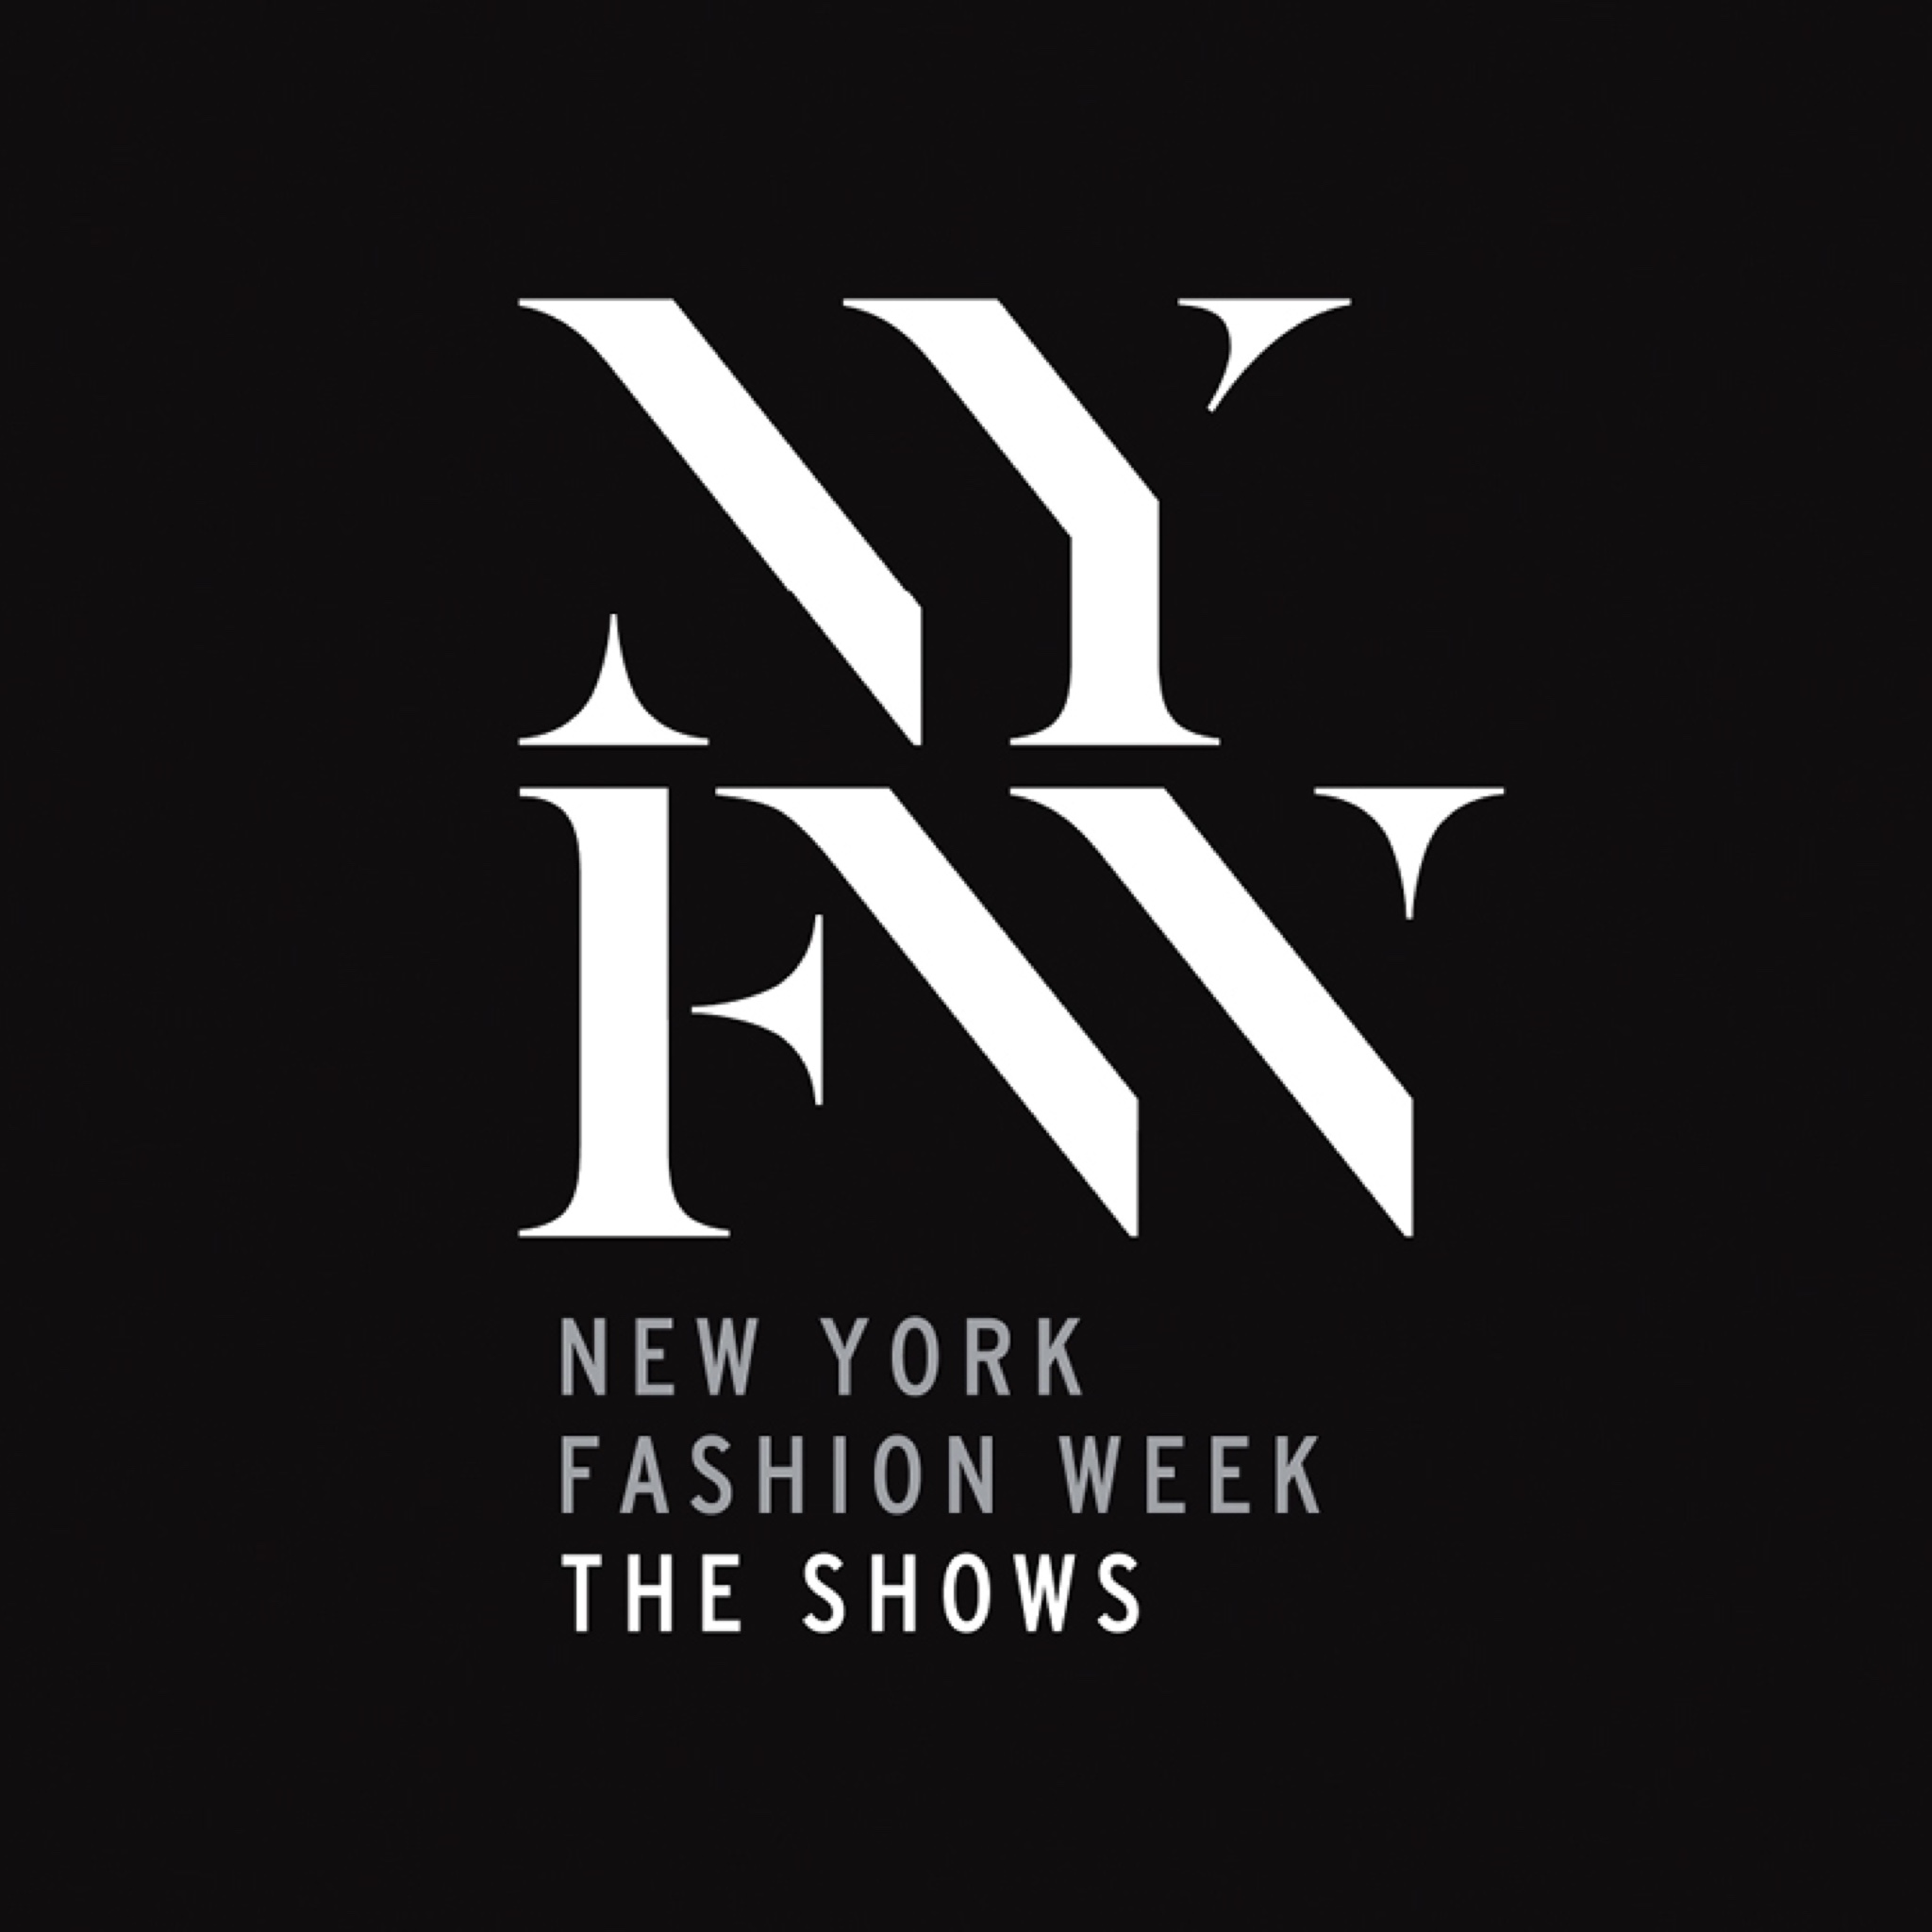 United States agency Altered State Productions helped New York Fashion Week grow their business with SEO and digital marketing